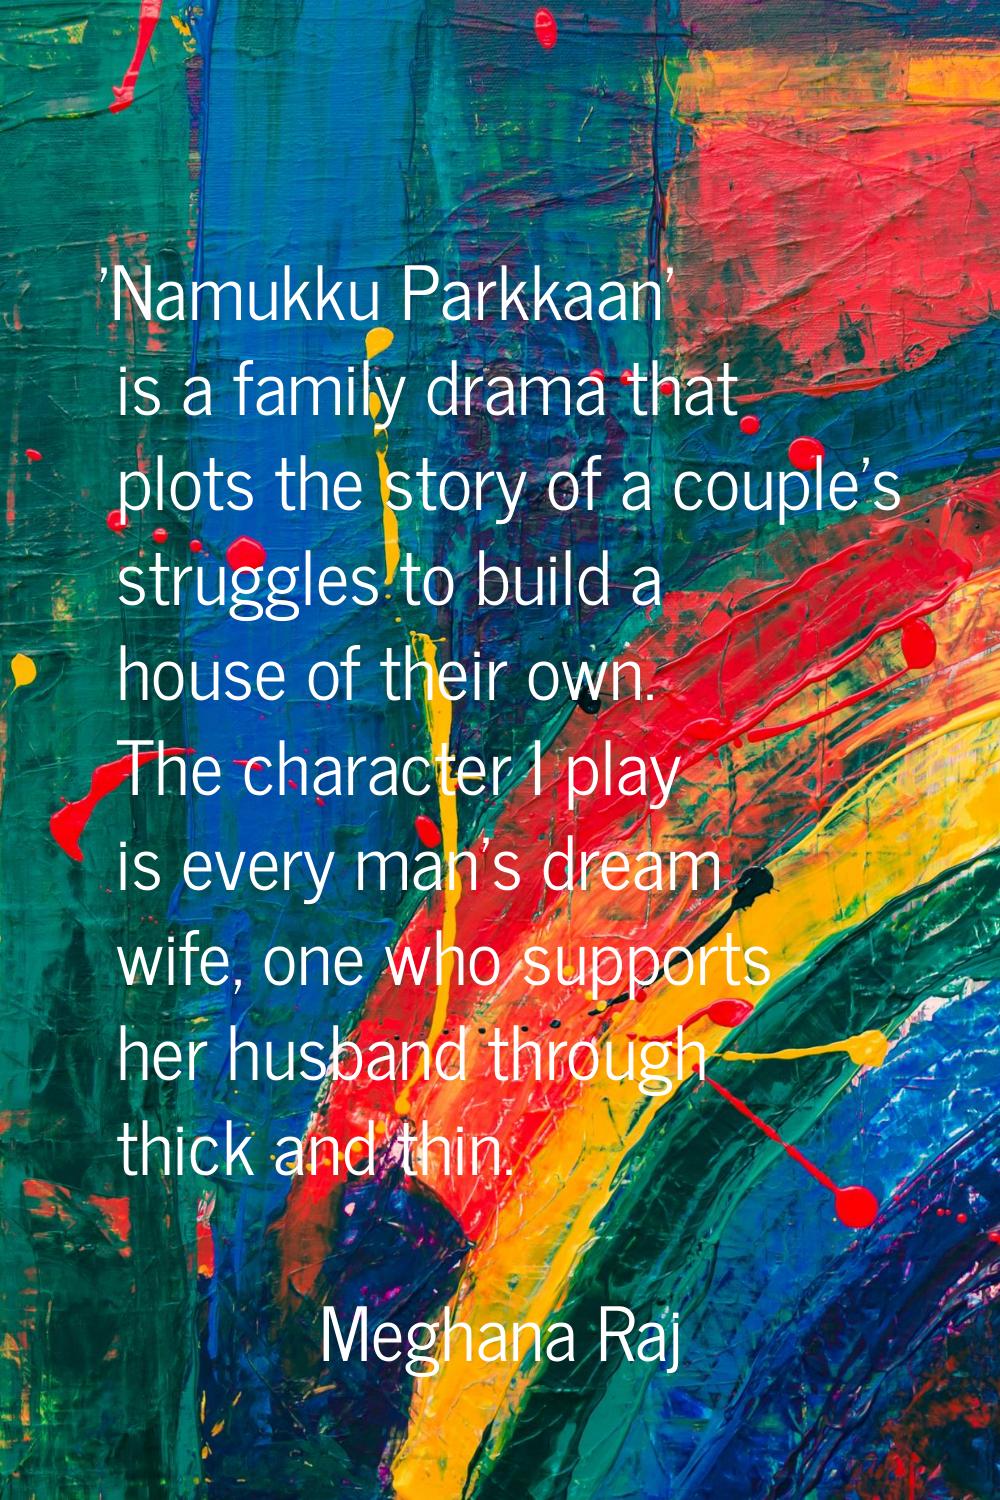 'Namukku Parkkaan' is a family drama that plots the story of a couple's struggles to build a house 